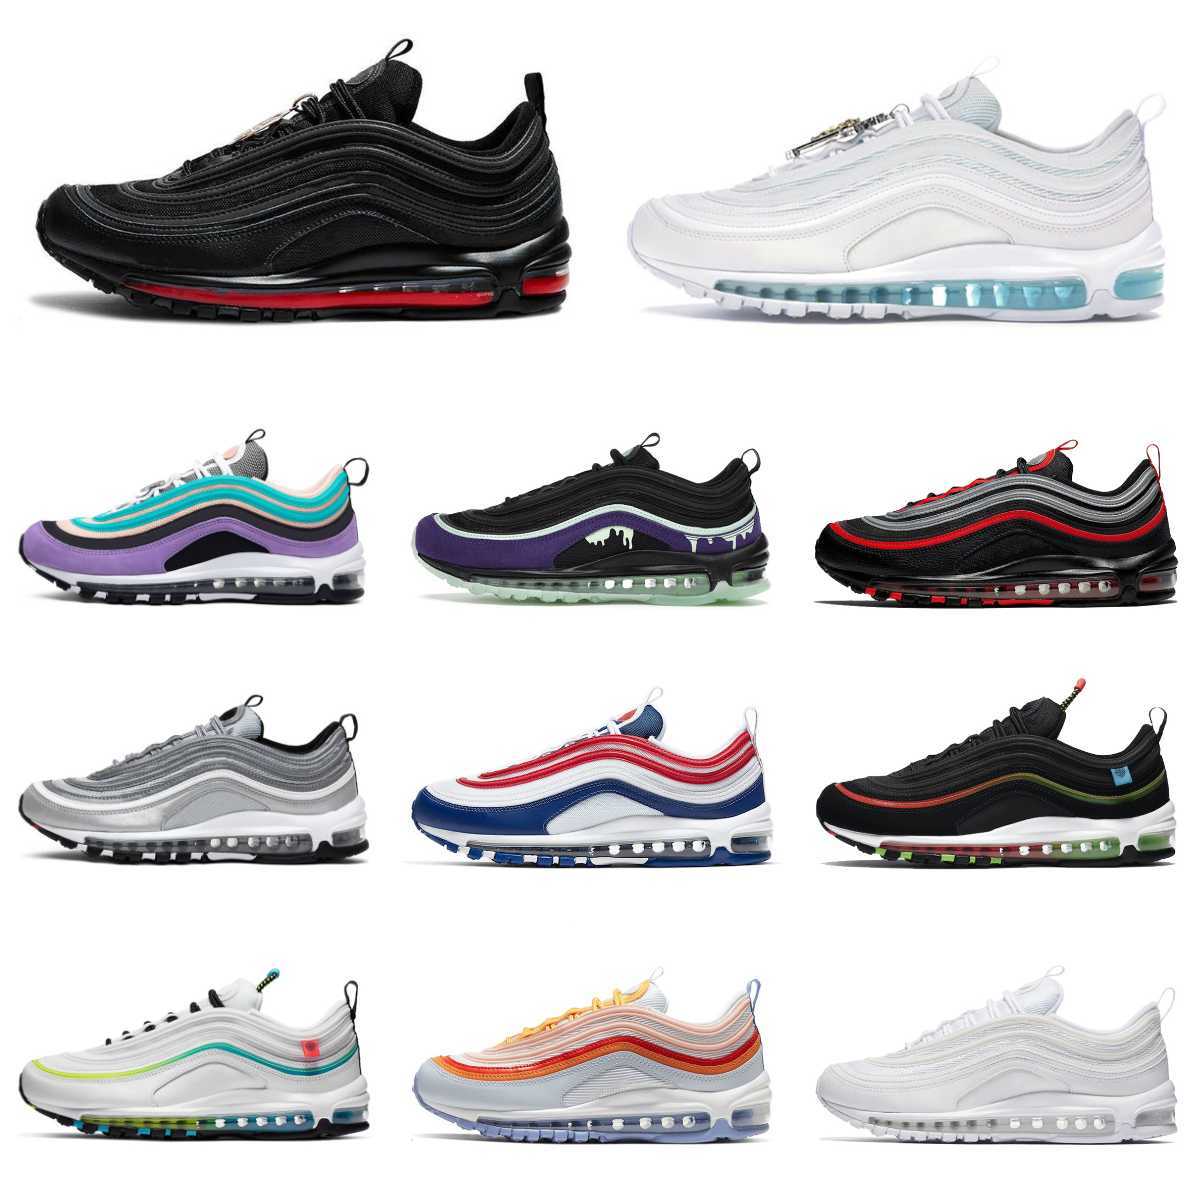 

2023 Classic 97 Sean Wotherspoon 97s Mens Running Shoes Vapores Good MSCHF X INRI Triple White Black Golf NRG Lucky And Jesus Celestial Men Women Trainer Sneakers S18, Please contact us